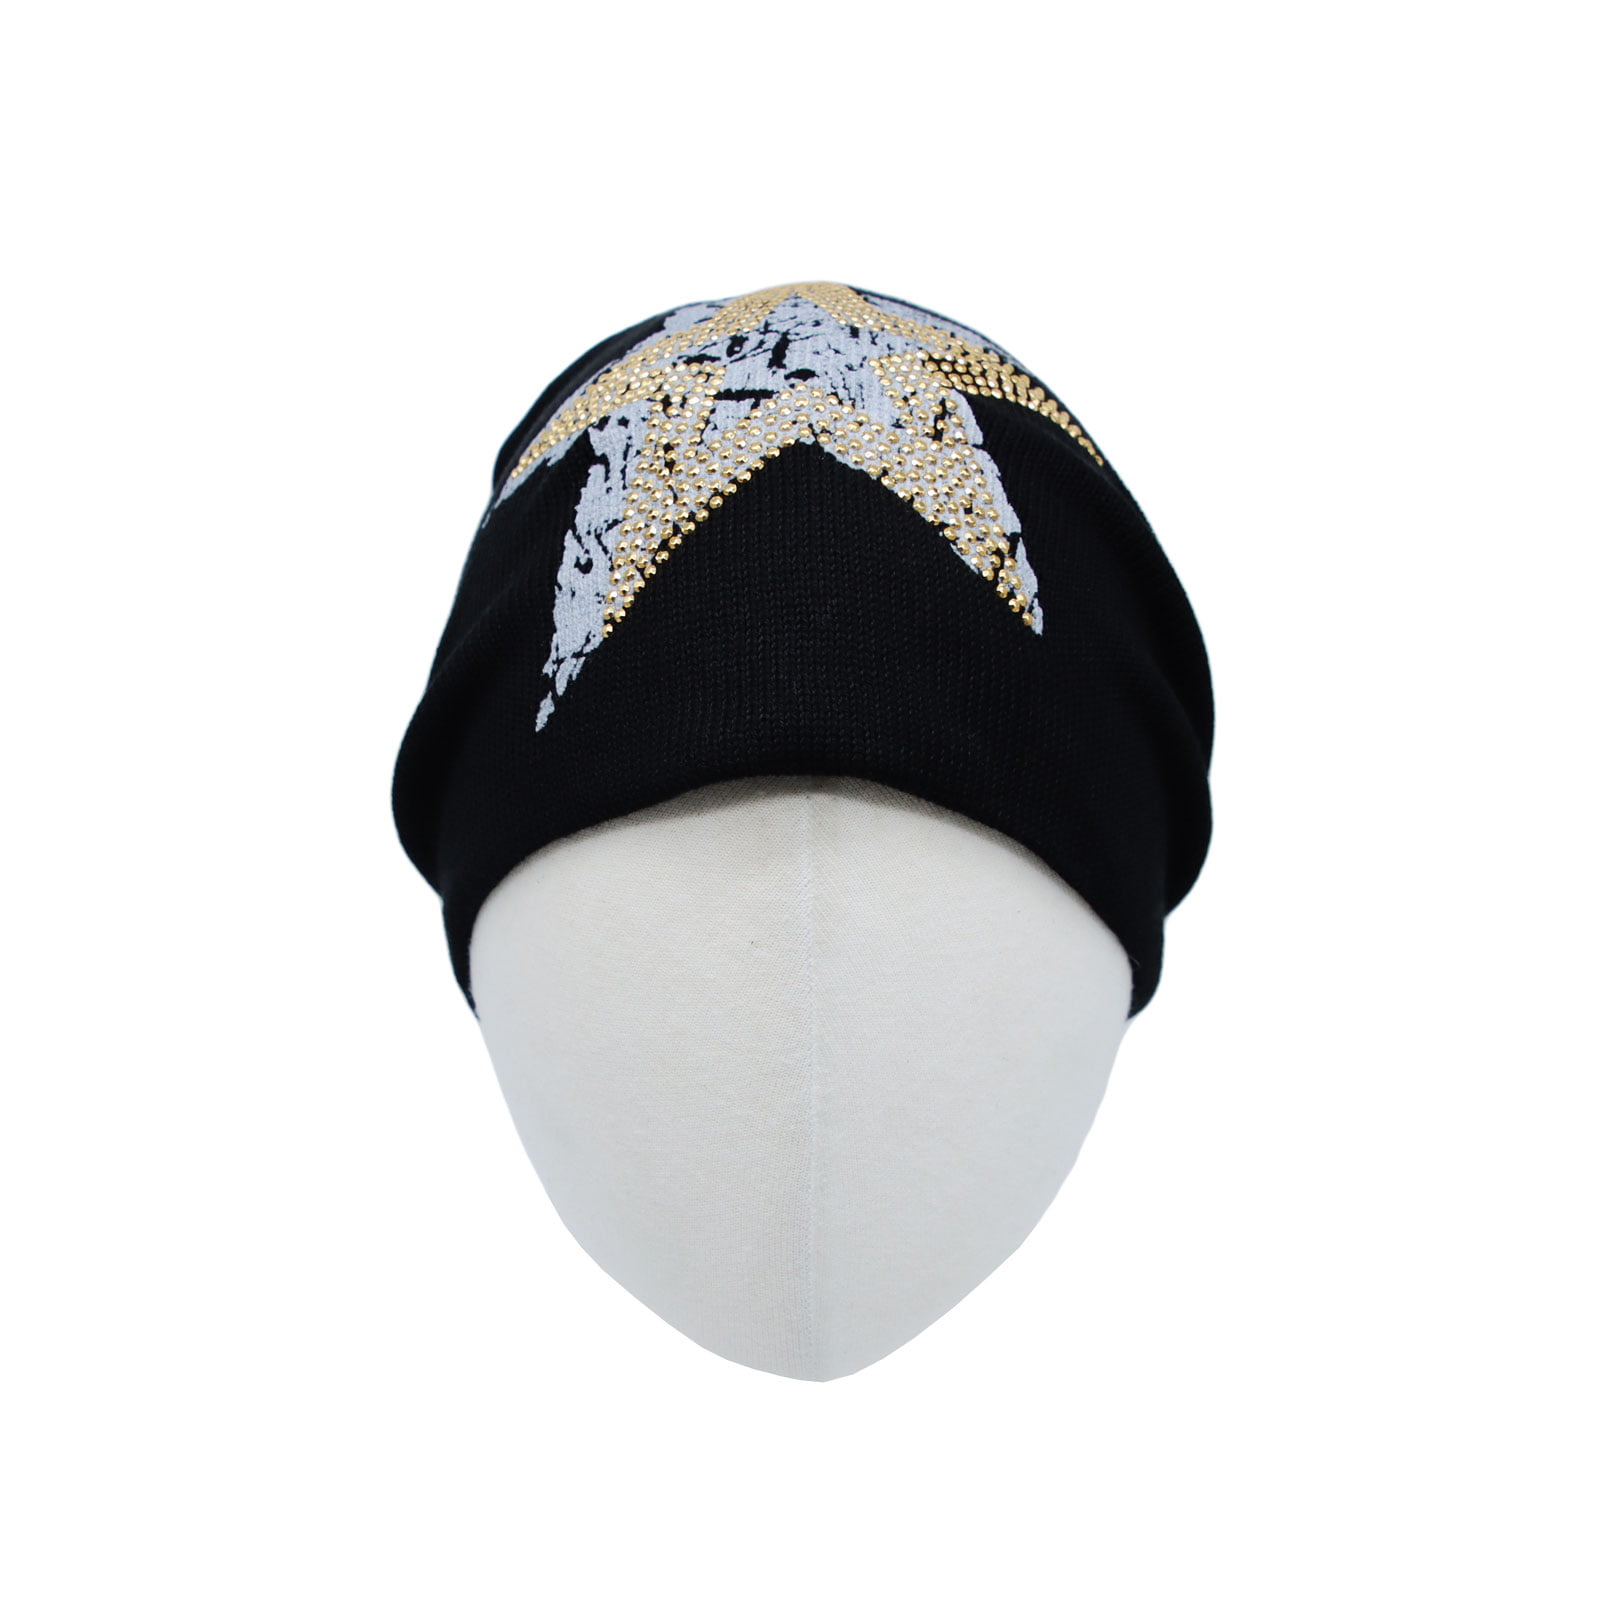 WITHMOONS Cotton Knitted Beanie Hat Star Rhinestone Skull Cap YT51353  (Silver)